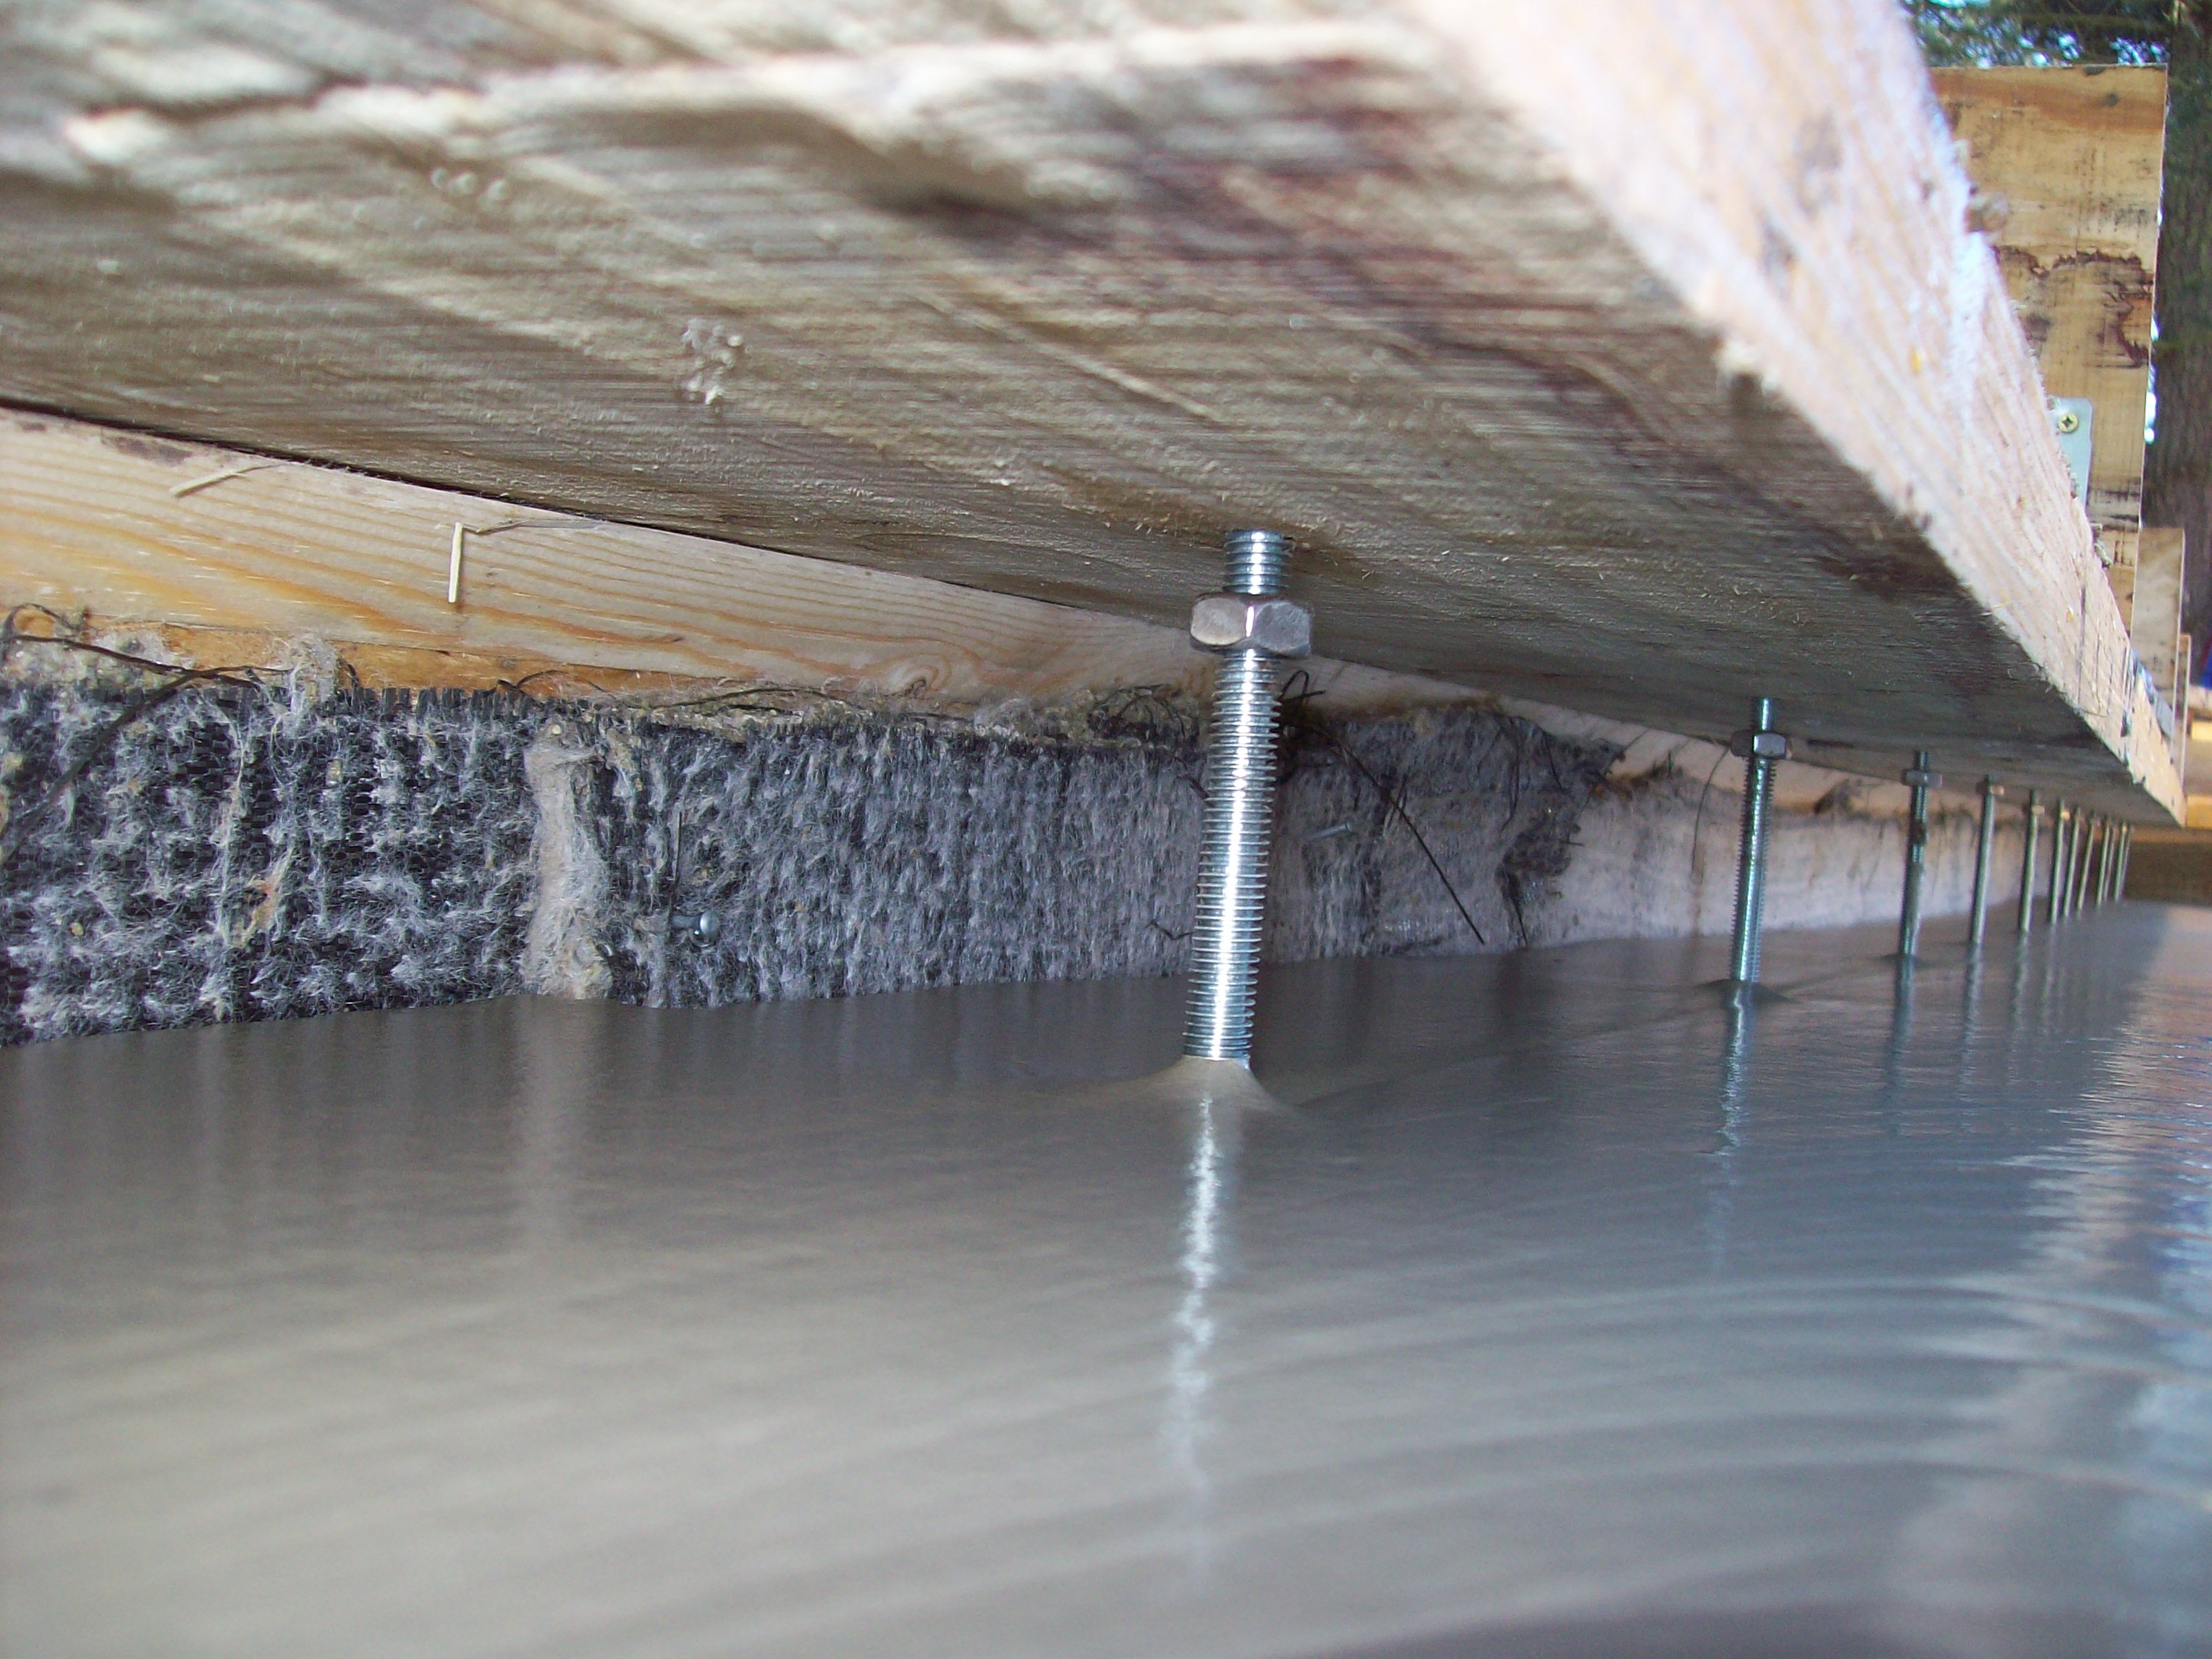 Foamed concrete used for thermally insulating sub floors at Dundee university environmentally sustainable housing project